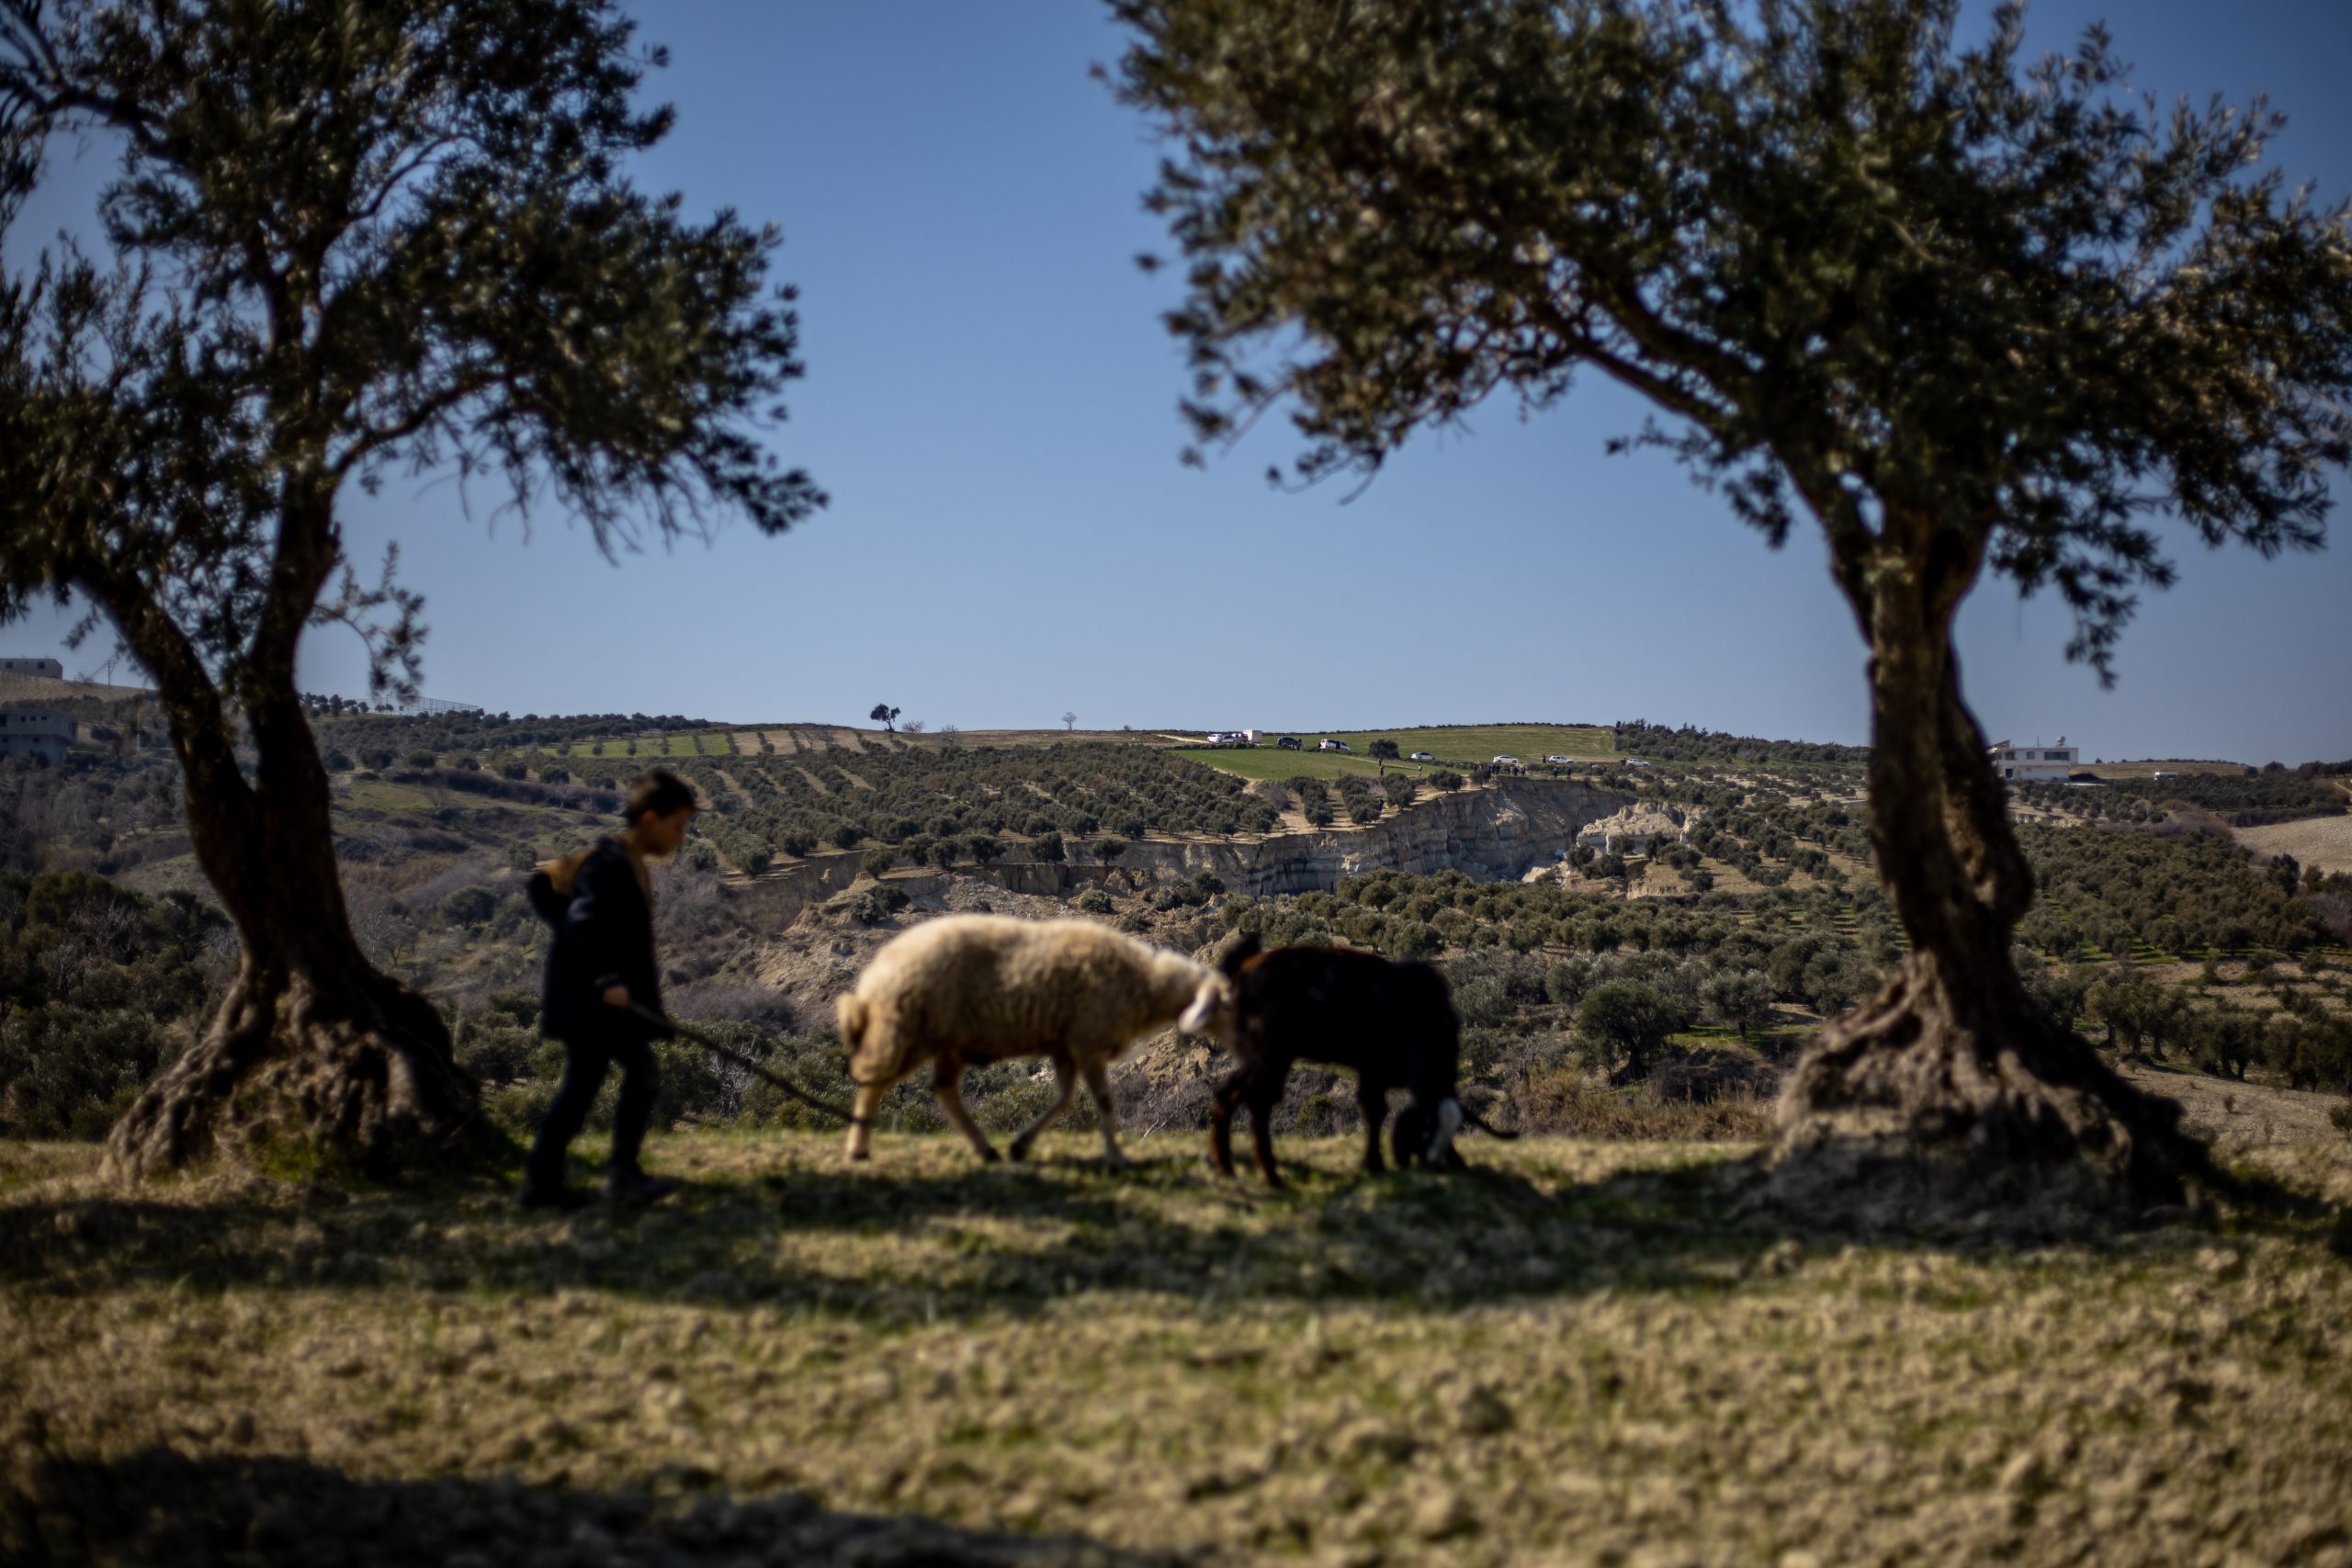 epa10474707 A boy herds sheep on the edge of a canyon created by a powerful earthquake that split an olive grove into two parts, near village of Tepehan, Turkey, 18 February 2023. More than 45,000 people have died and thousands more are injured after two major earthquakes struck southern Turkey and northern Syria on 06 February. Authorities fear the death toll will keep climbing as rescuers look for survivors across the region.  EPA/MARTIN DIVISEK